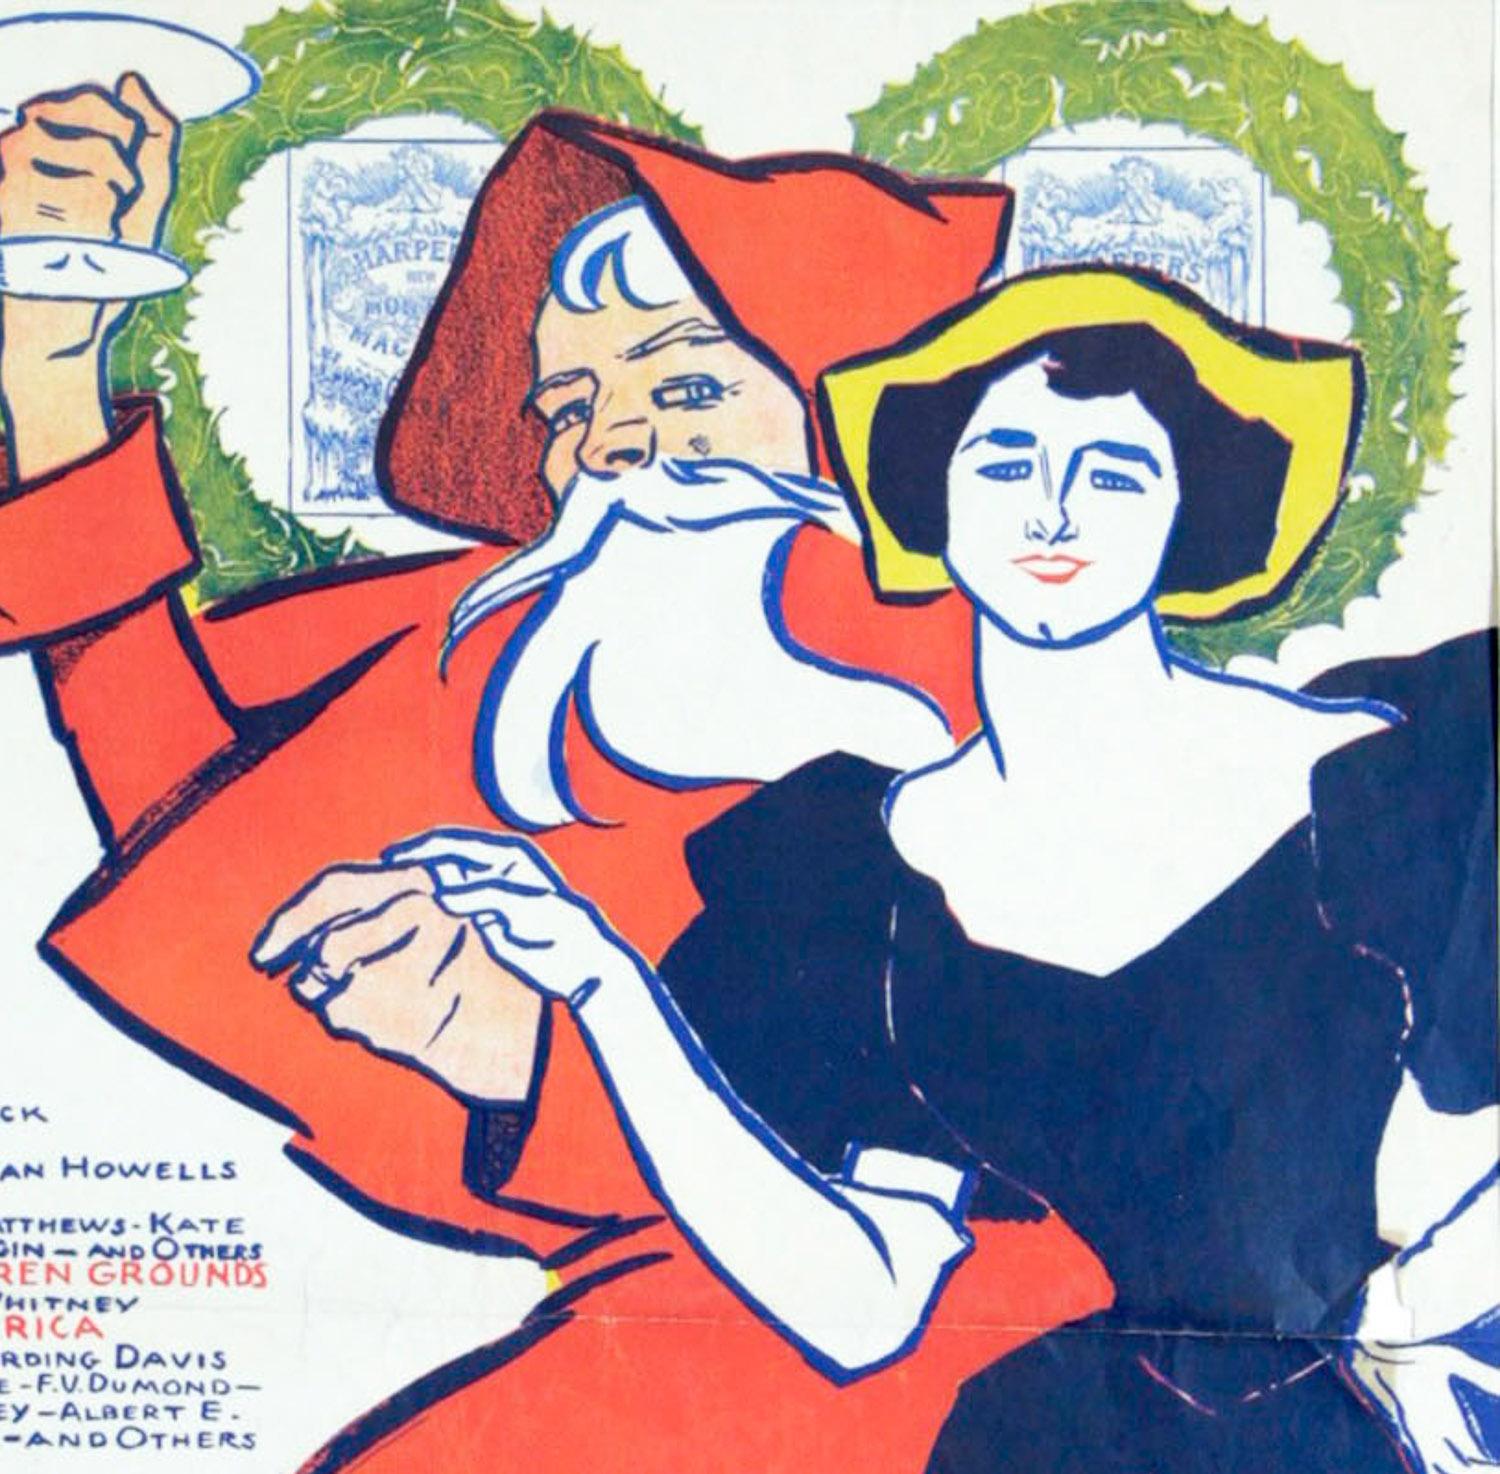 Harper's Christmas Poster by Penfield - Print by Edward Penfield